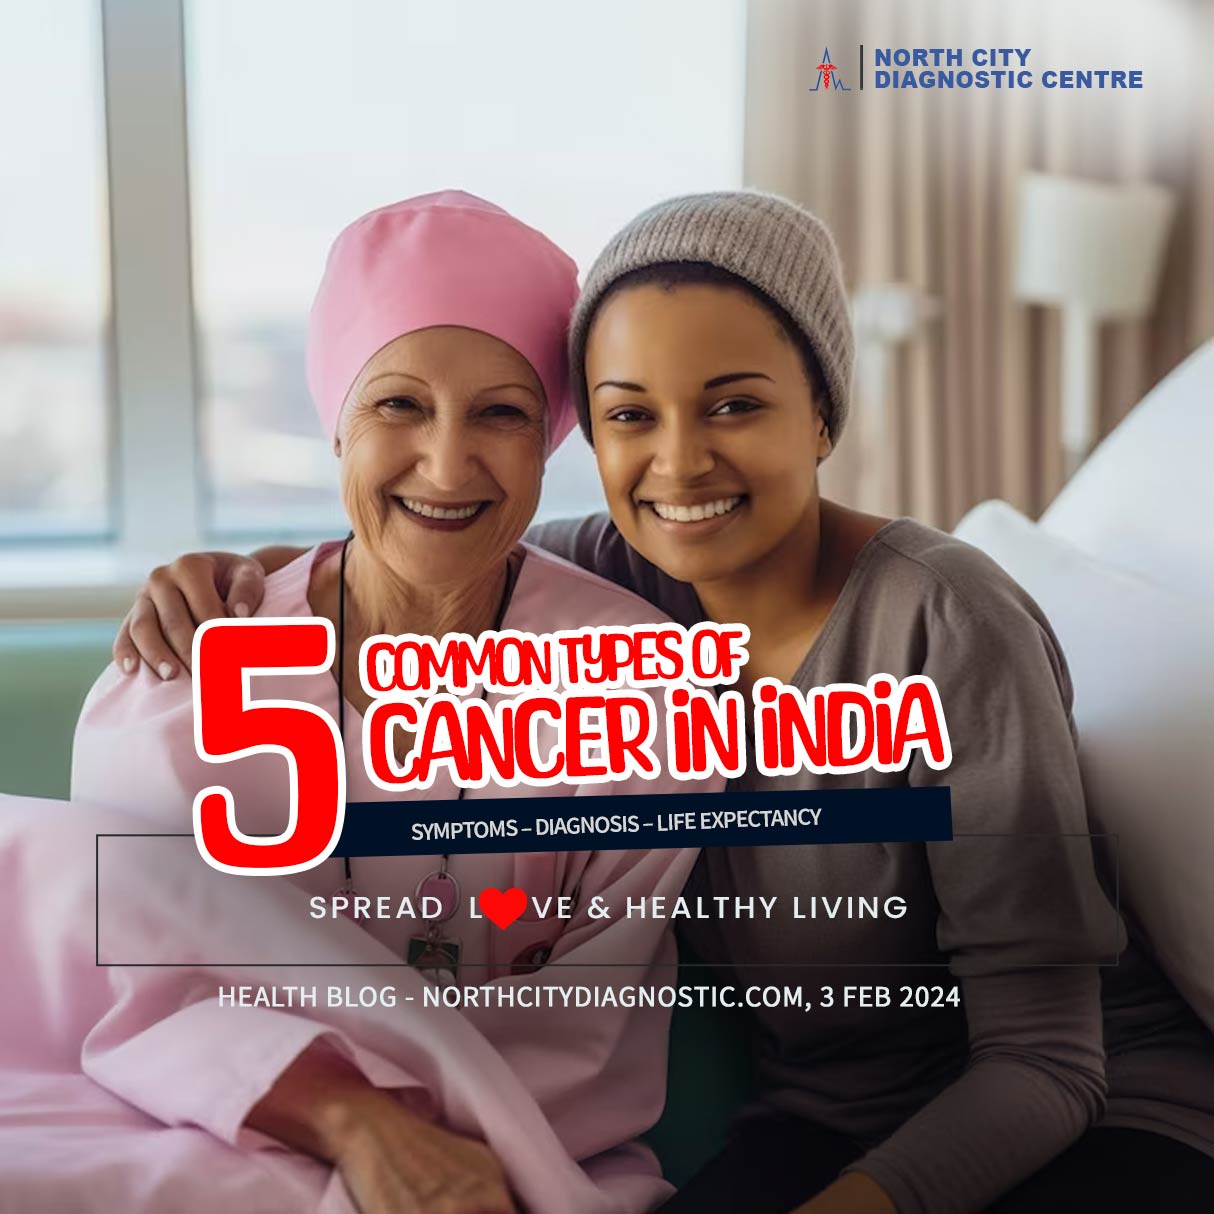 5 Common Types of Cancer in India